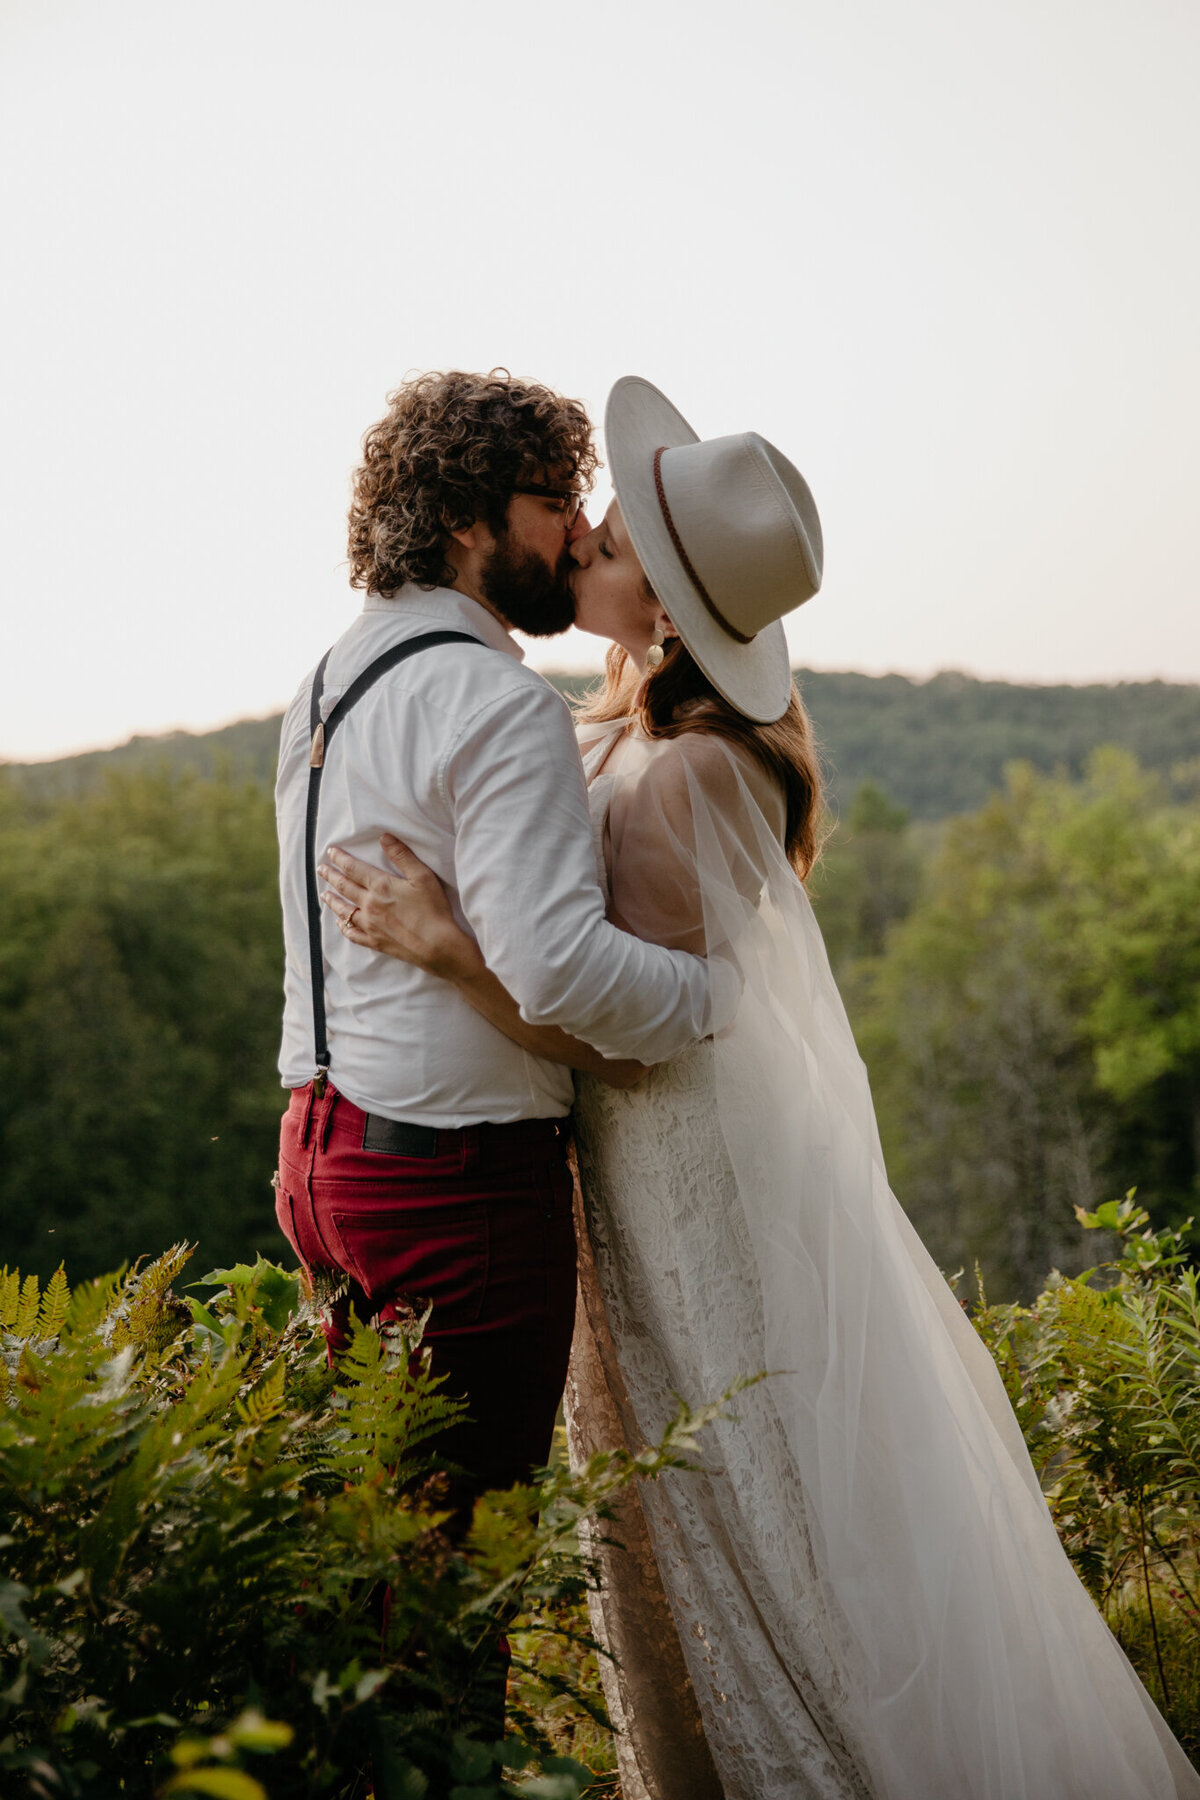 Manistee-Forest-Michigan-Elopement-082021-SparrowSongCollective-Blog-624